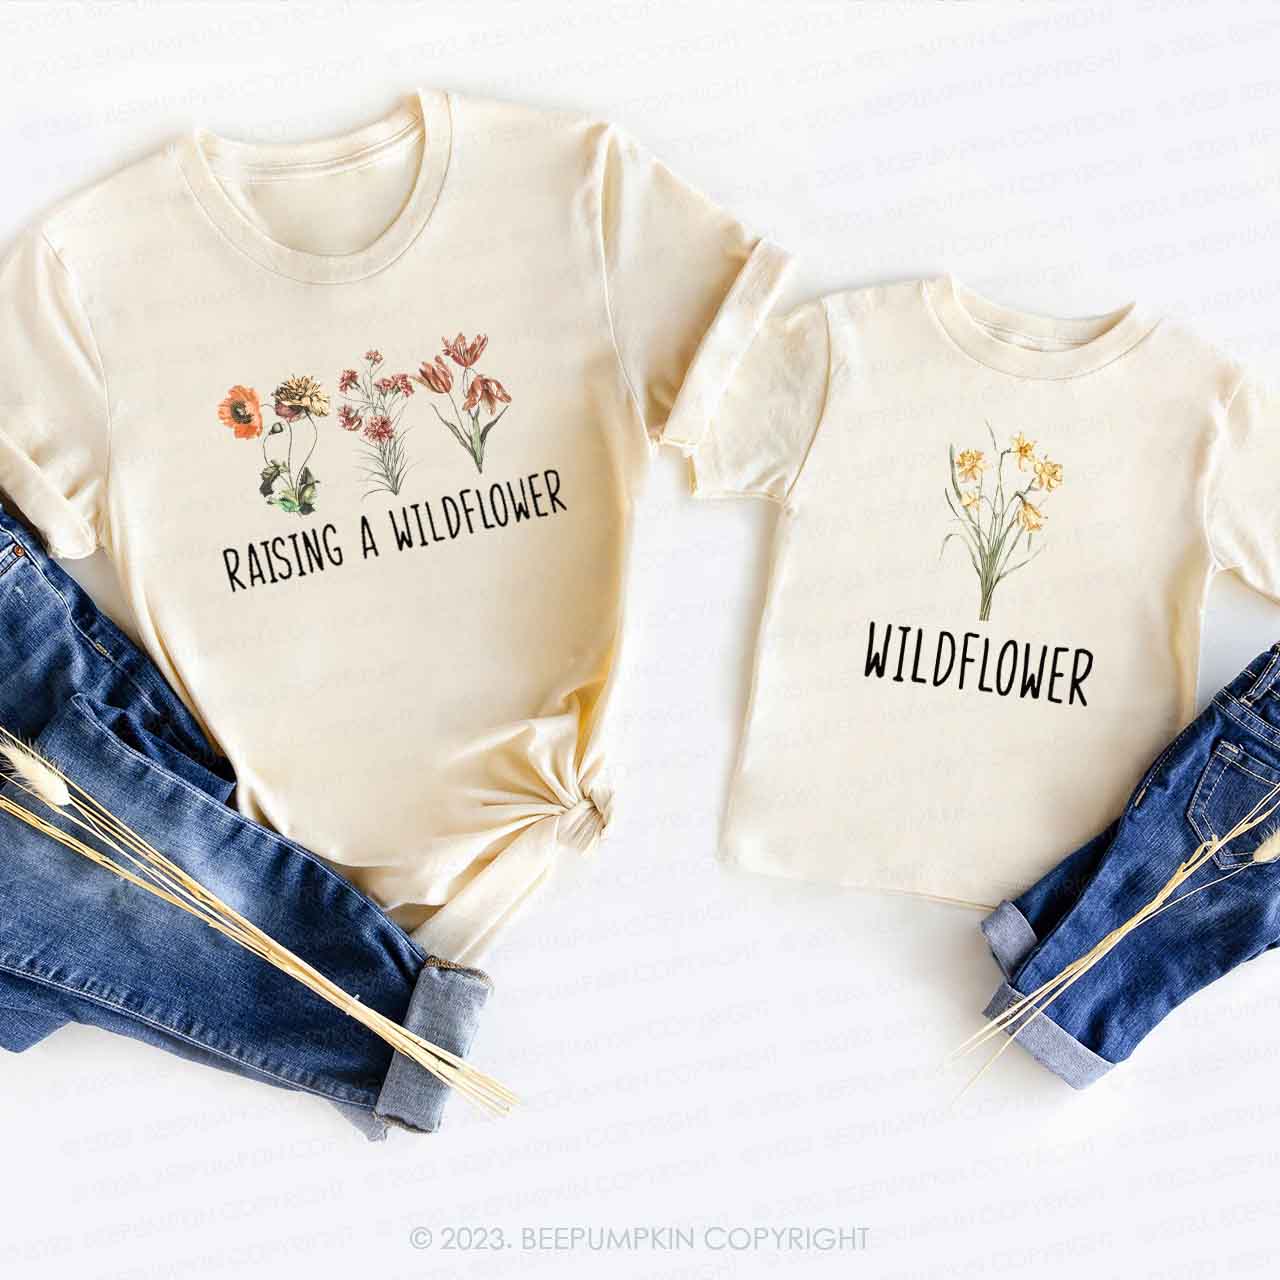 Raising A Wildflower And Wildflower Mom&Me Matching Tees